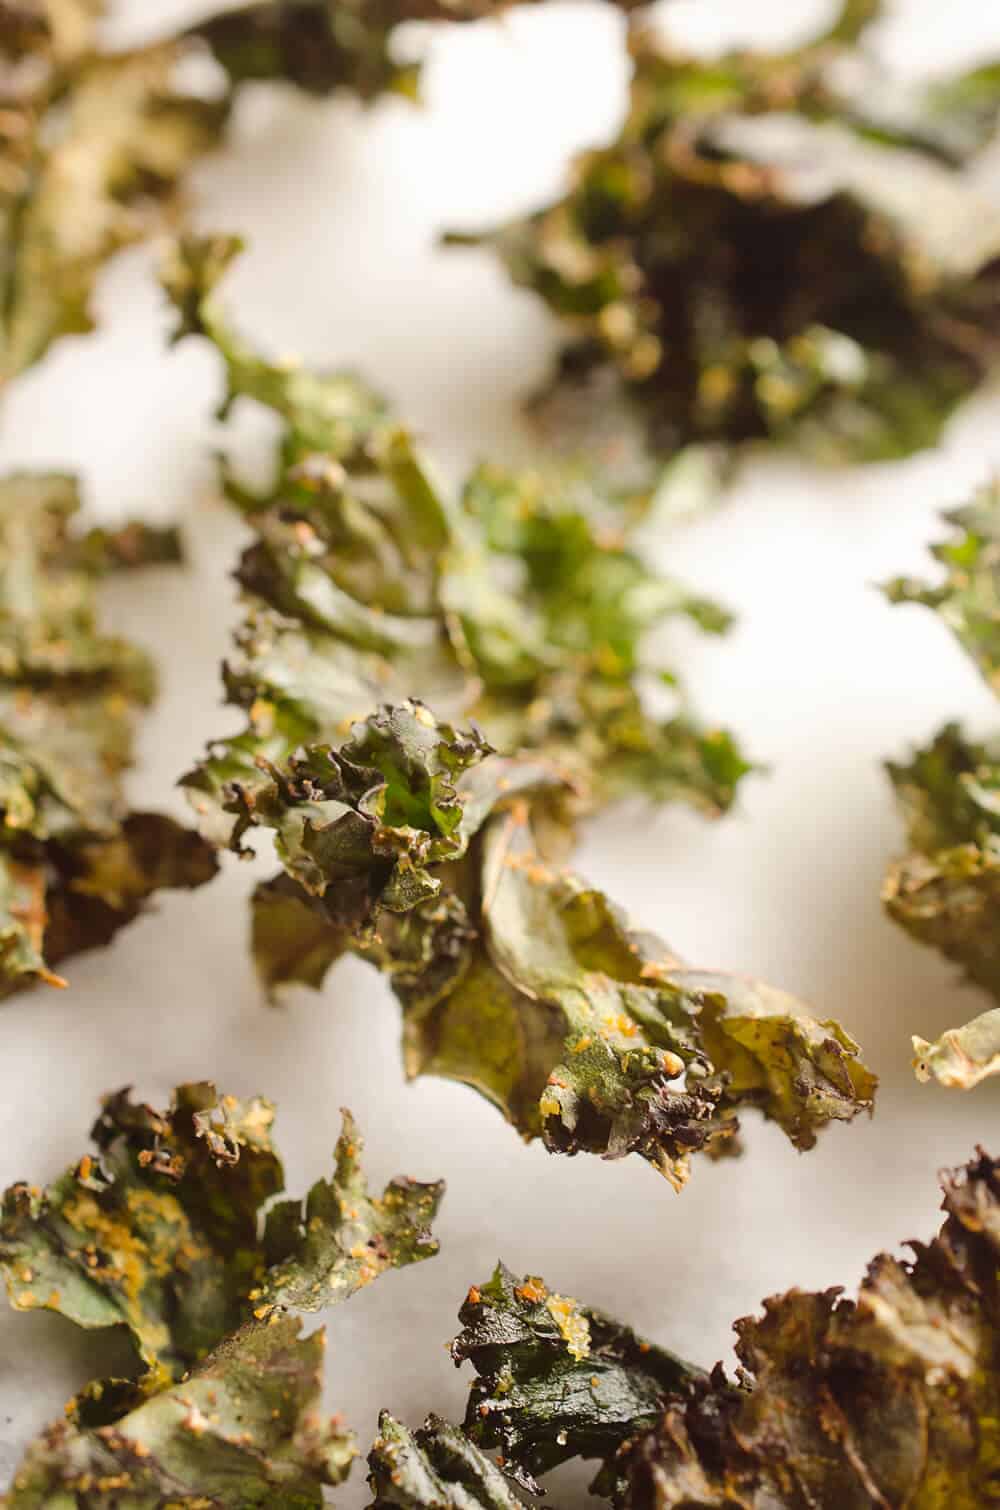 Spicy Kale Chips are beautifully crisp and loaded with bold chipotle flavor for a healthy 5 ingredient snack. They are perfect for the munchies or paired with your favorite sandwich on the side!